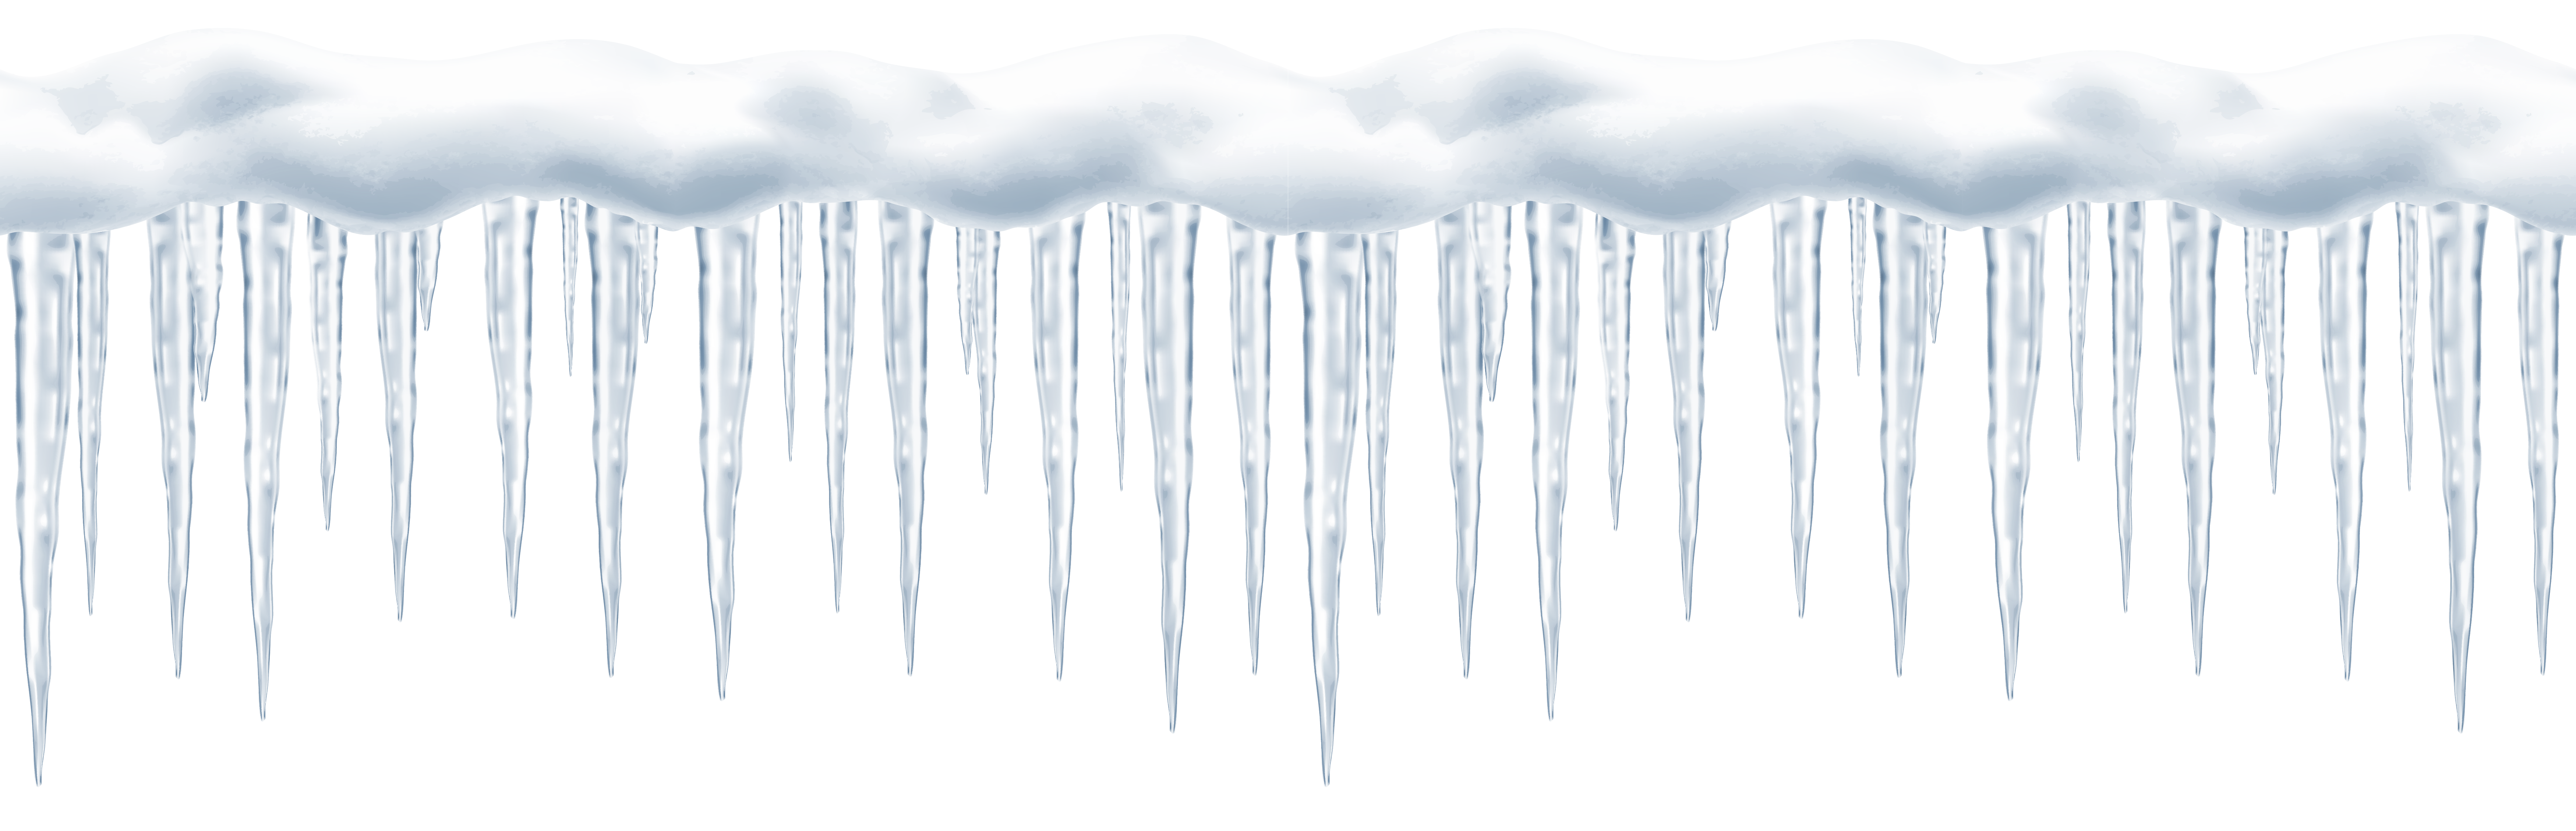 Icicles Free Download PNG HQ PNG Image